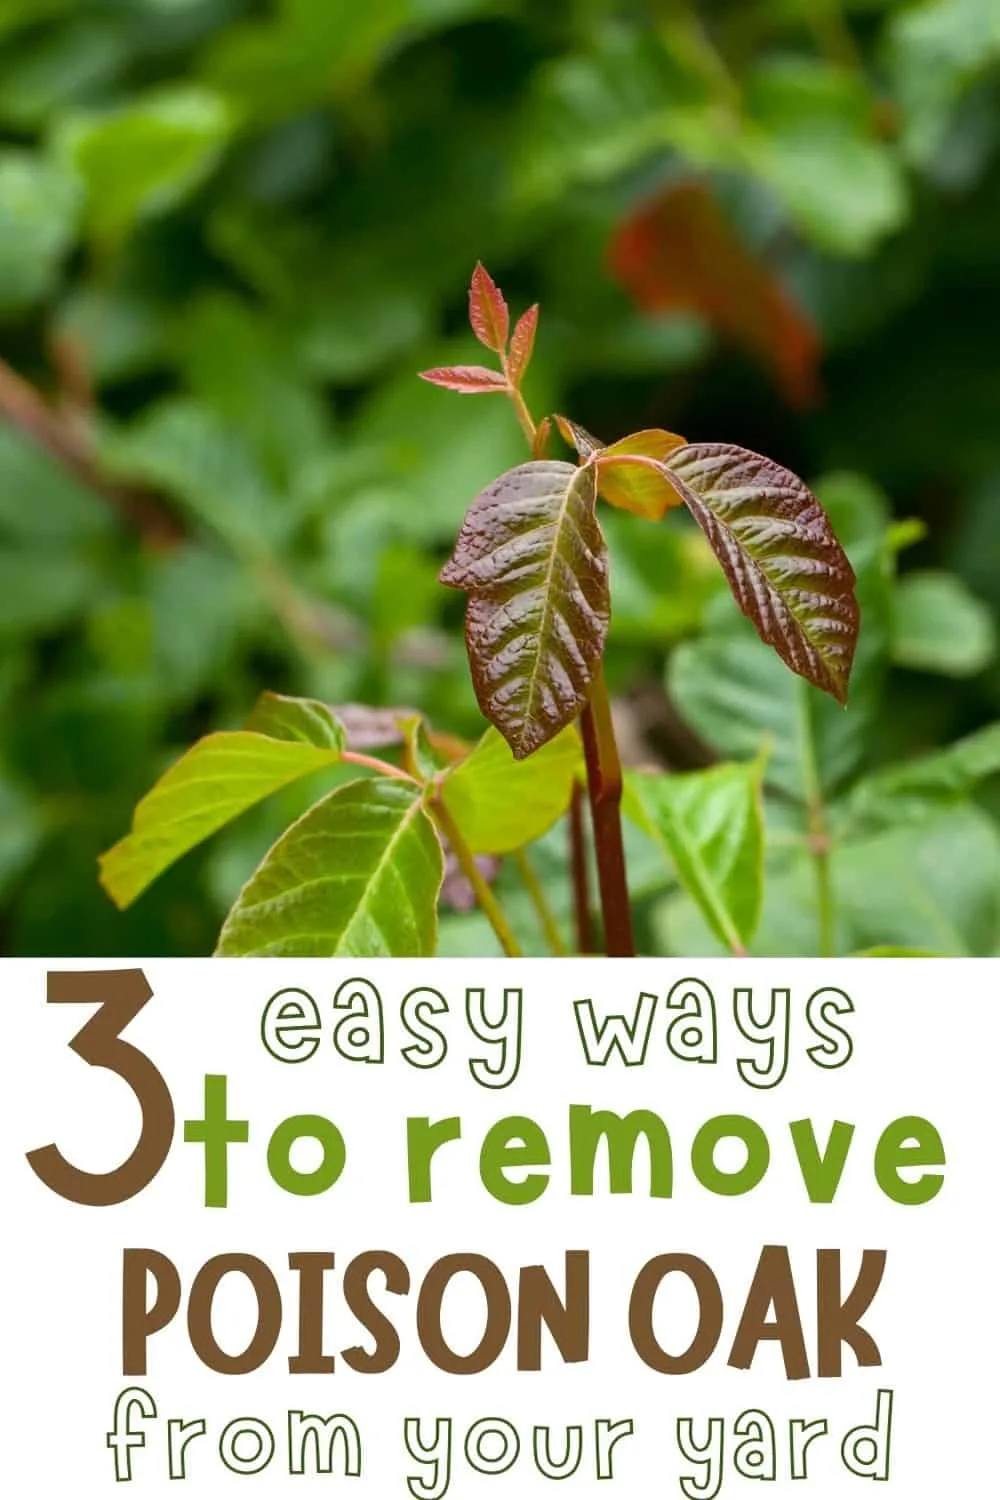 3 easy ways to remove poison oak from your yard